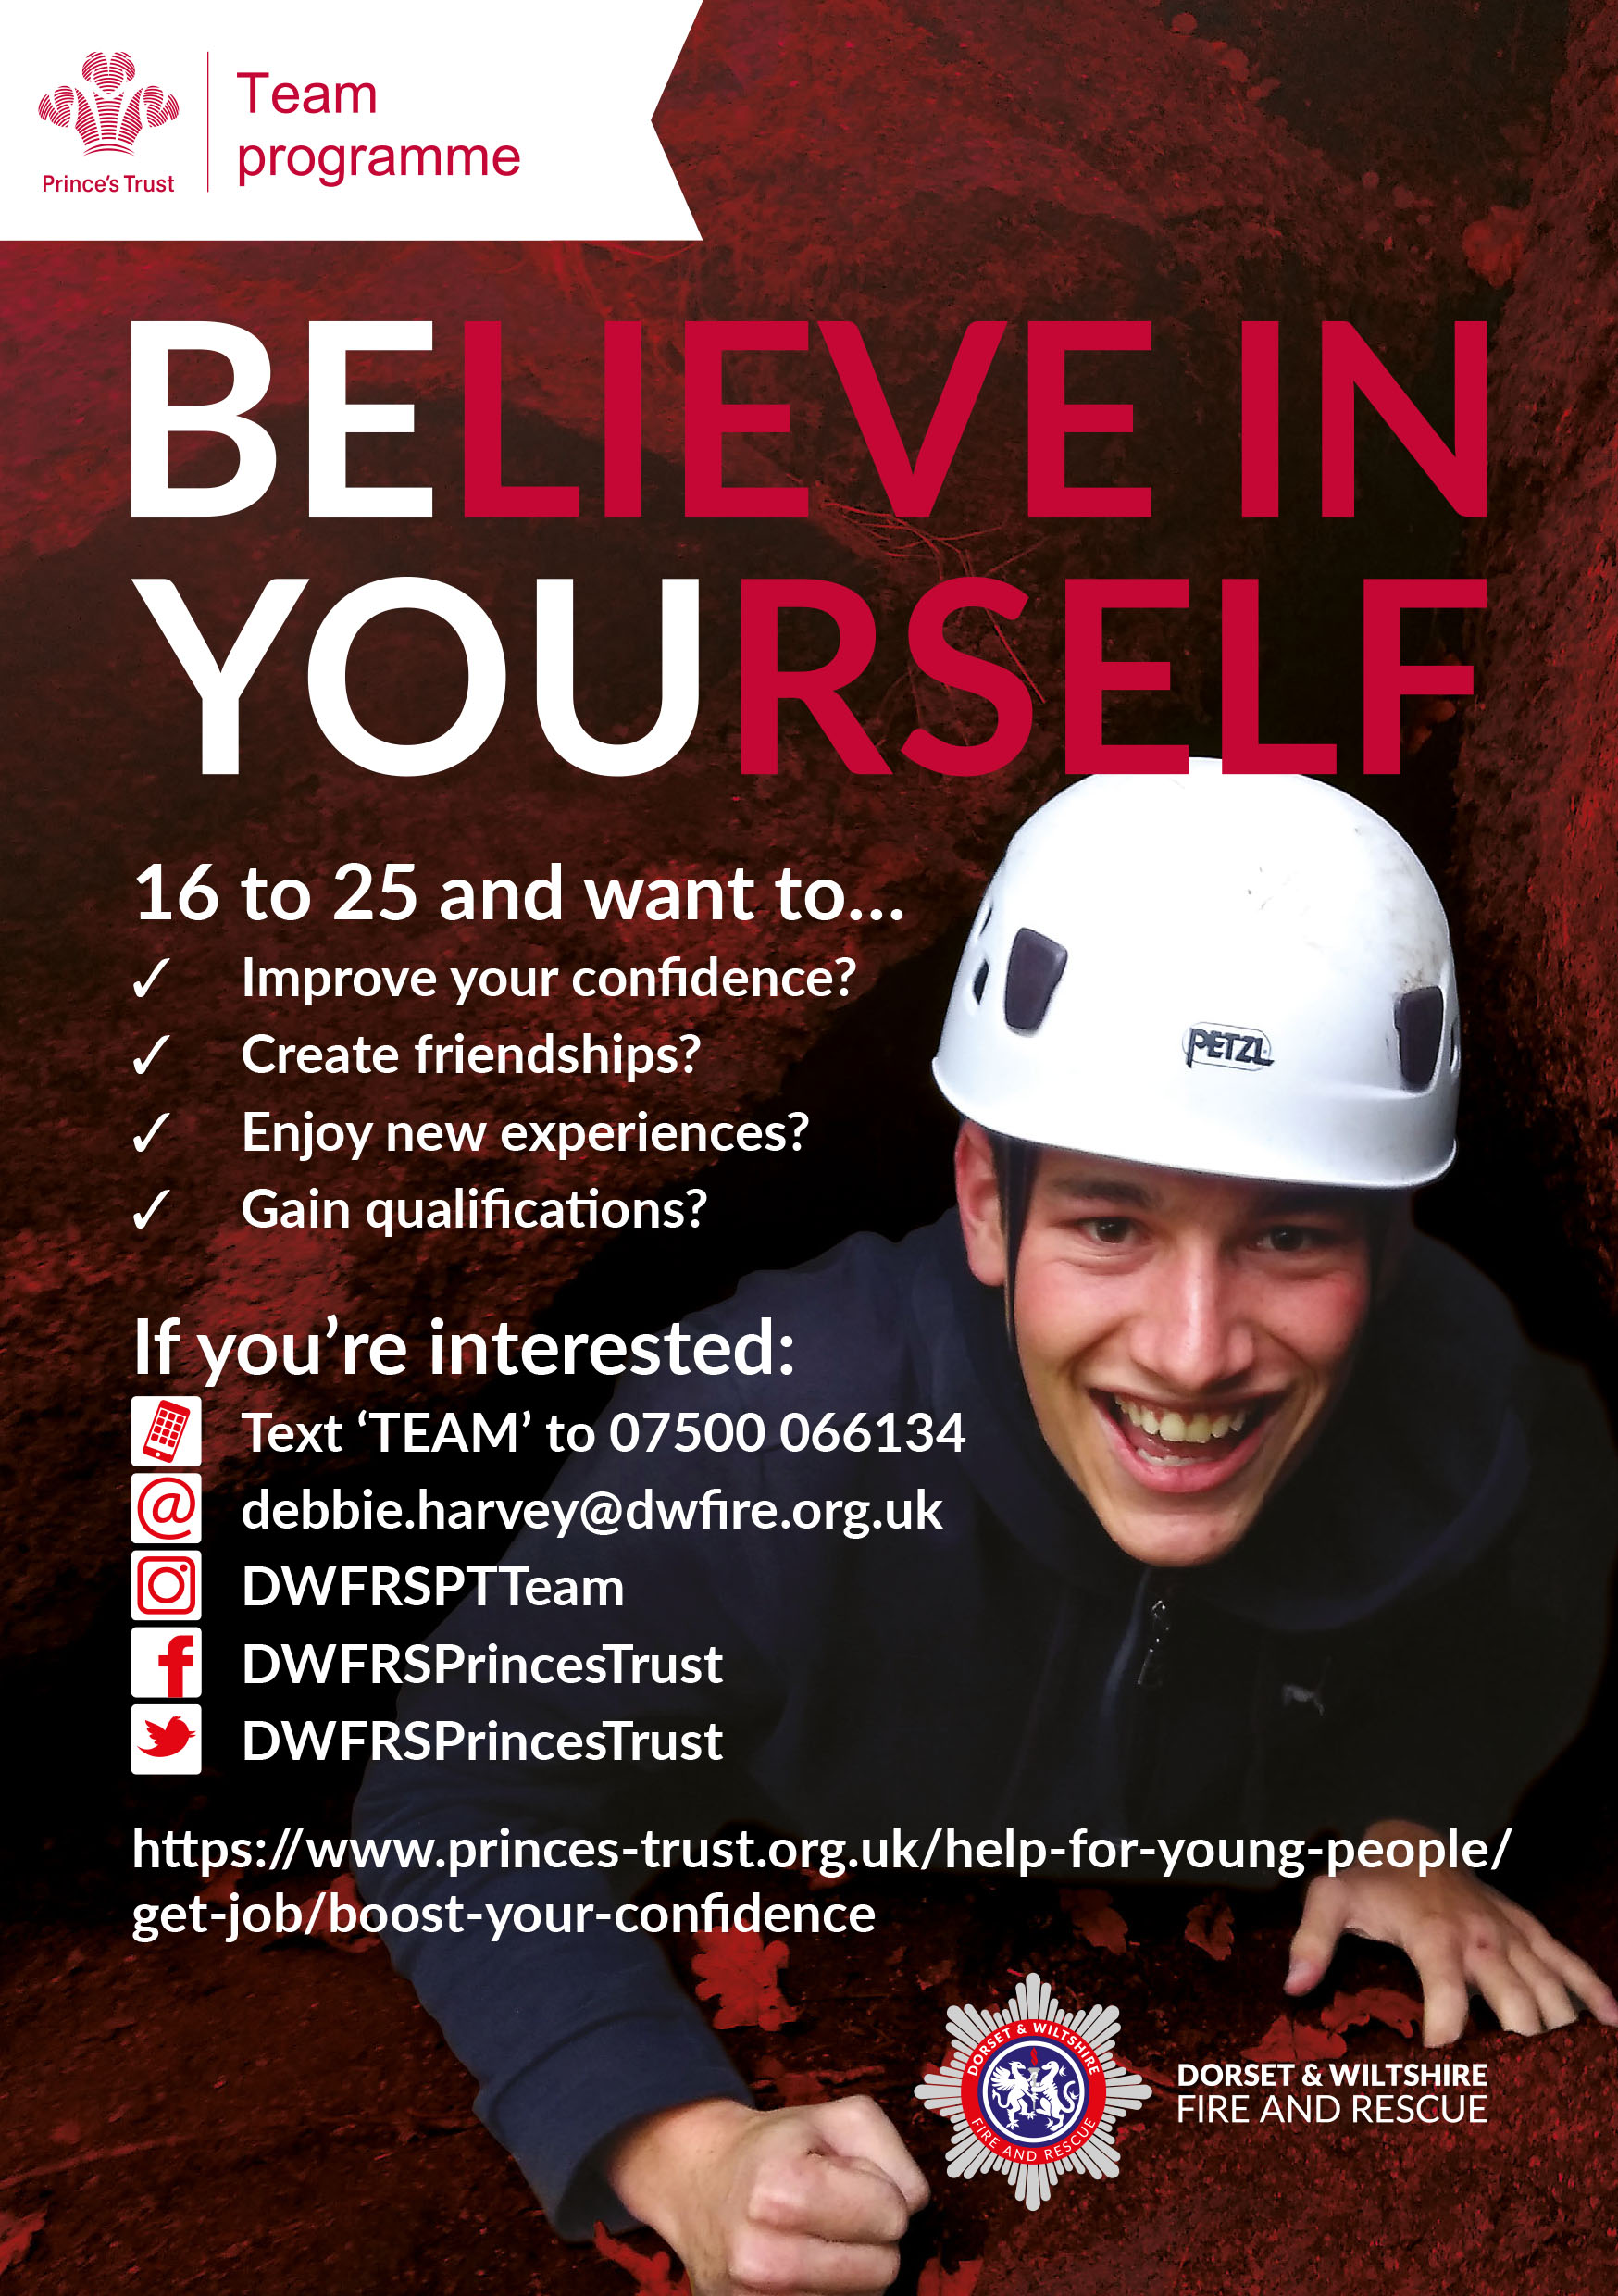 Leaflet explaining who Prince's Trust Team programme is aimed at